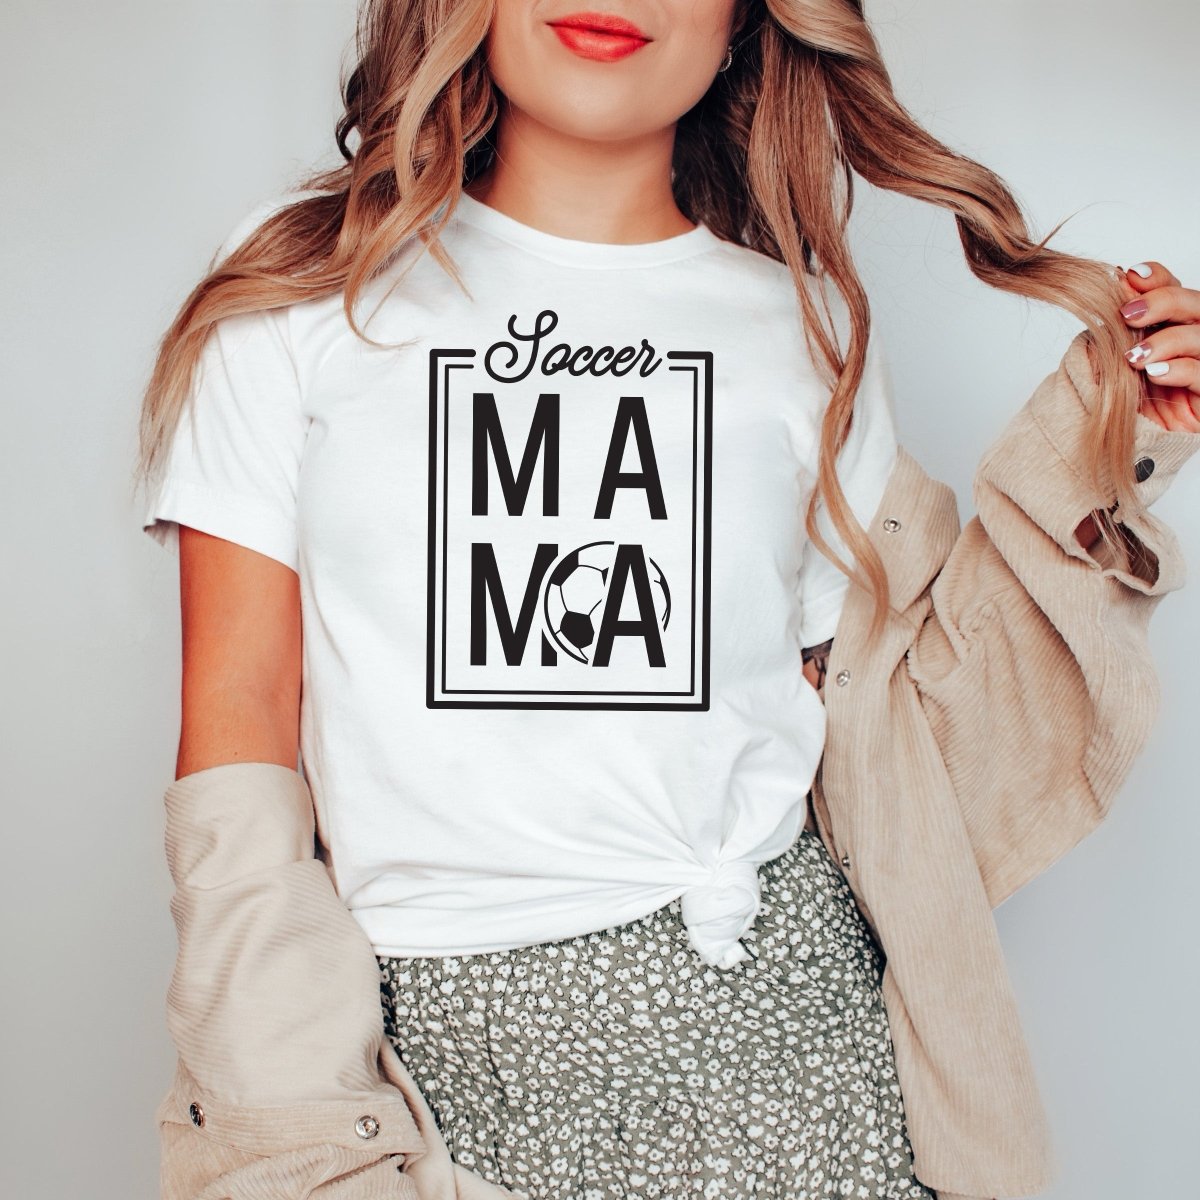 Soccer MAMA Tee - Limeberry Designs